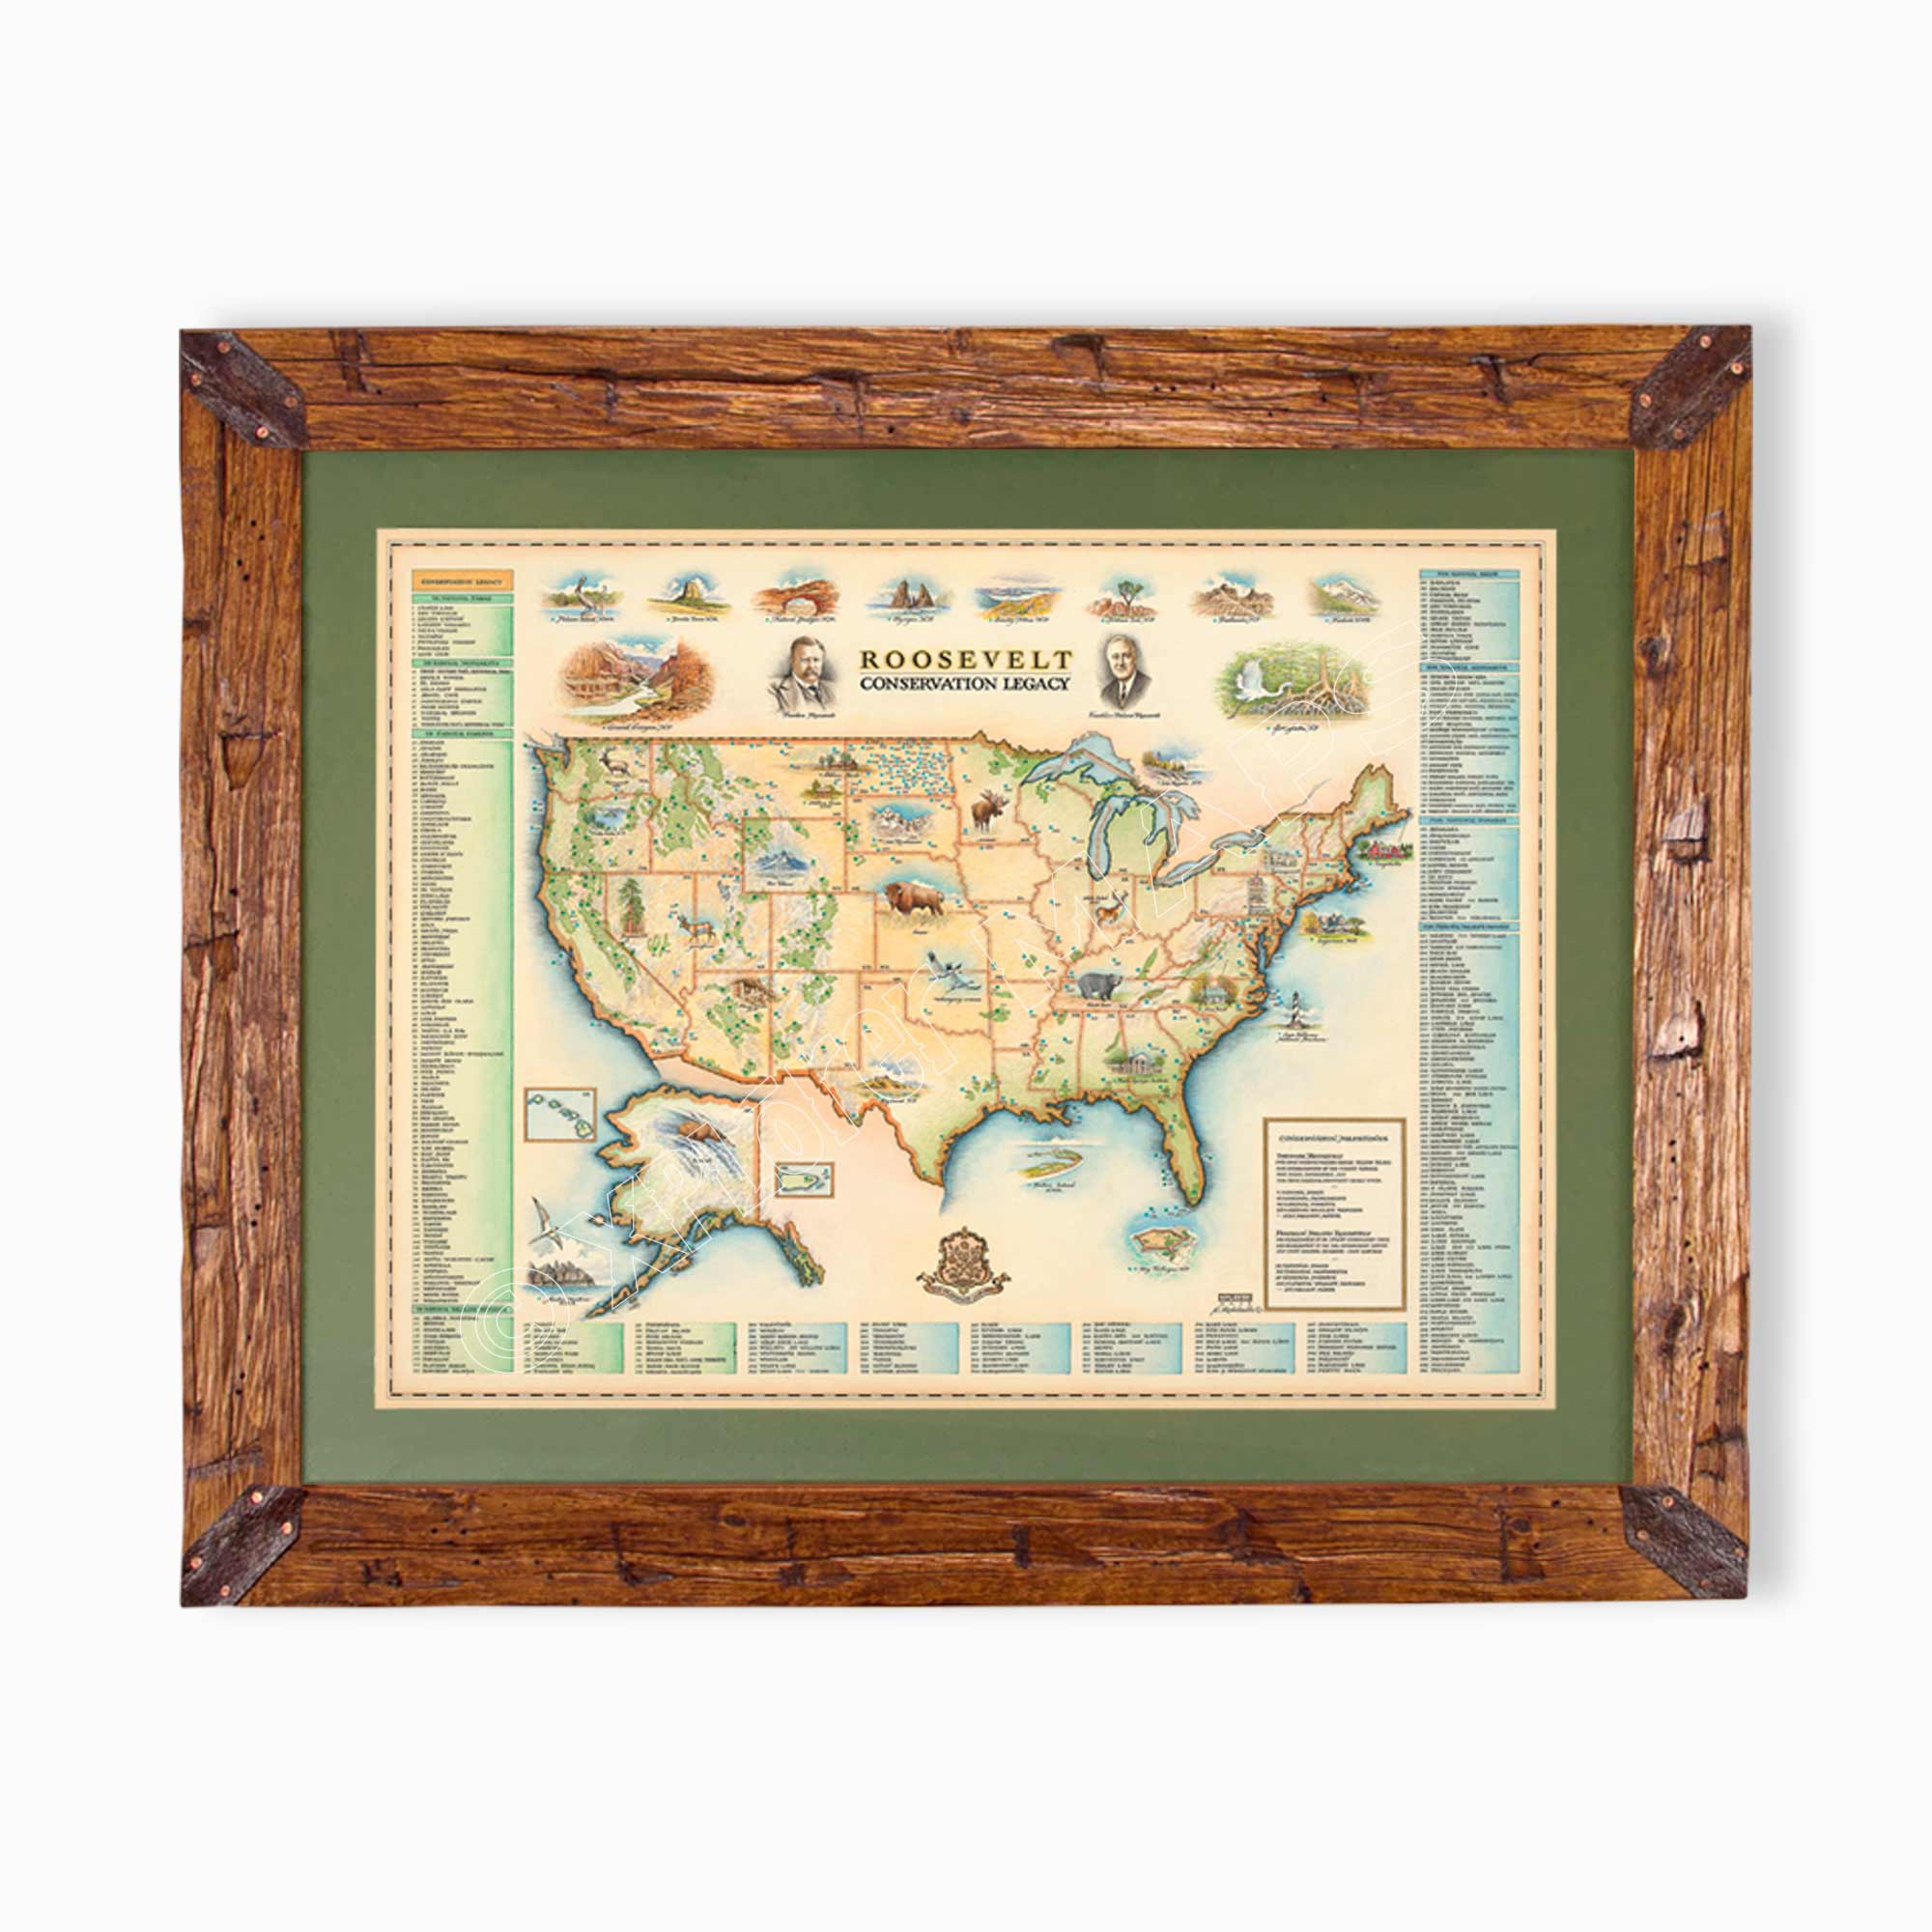 Roosevelt's USA Conservation Legacy hand-drawn map in earth tones blues and greens. The map print is framed in Montana hand-scraped pine with a green mat.